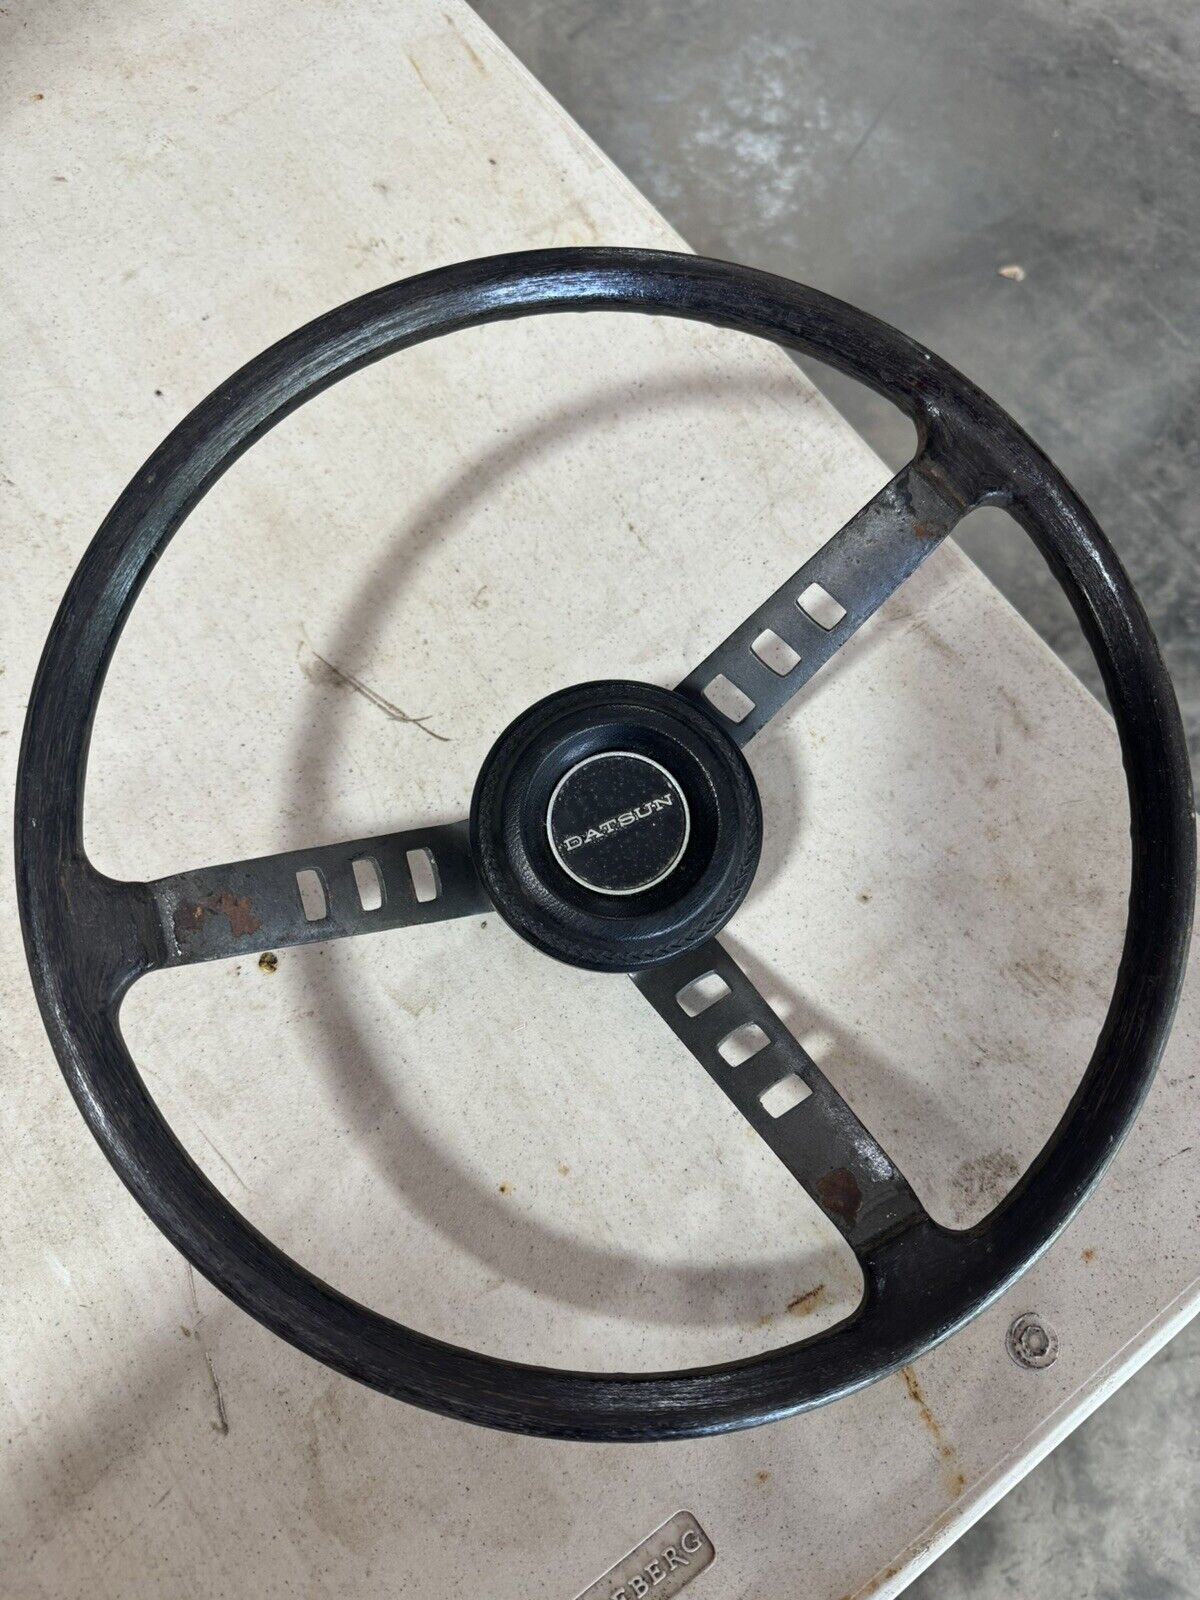 Datsun 240z Steering Wheel With Horn Button 71 72 73 Wood OEM Used Nissan Rare